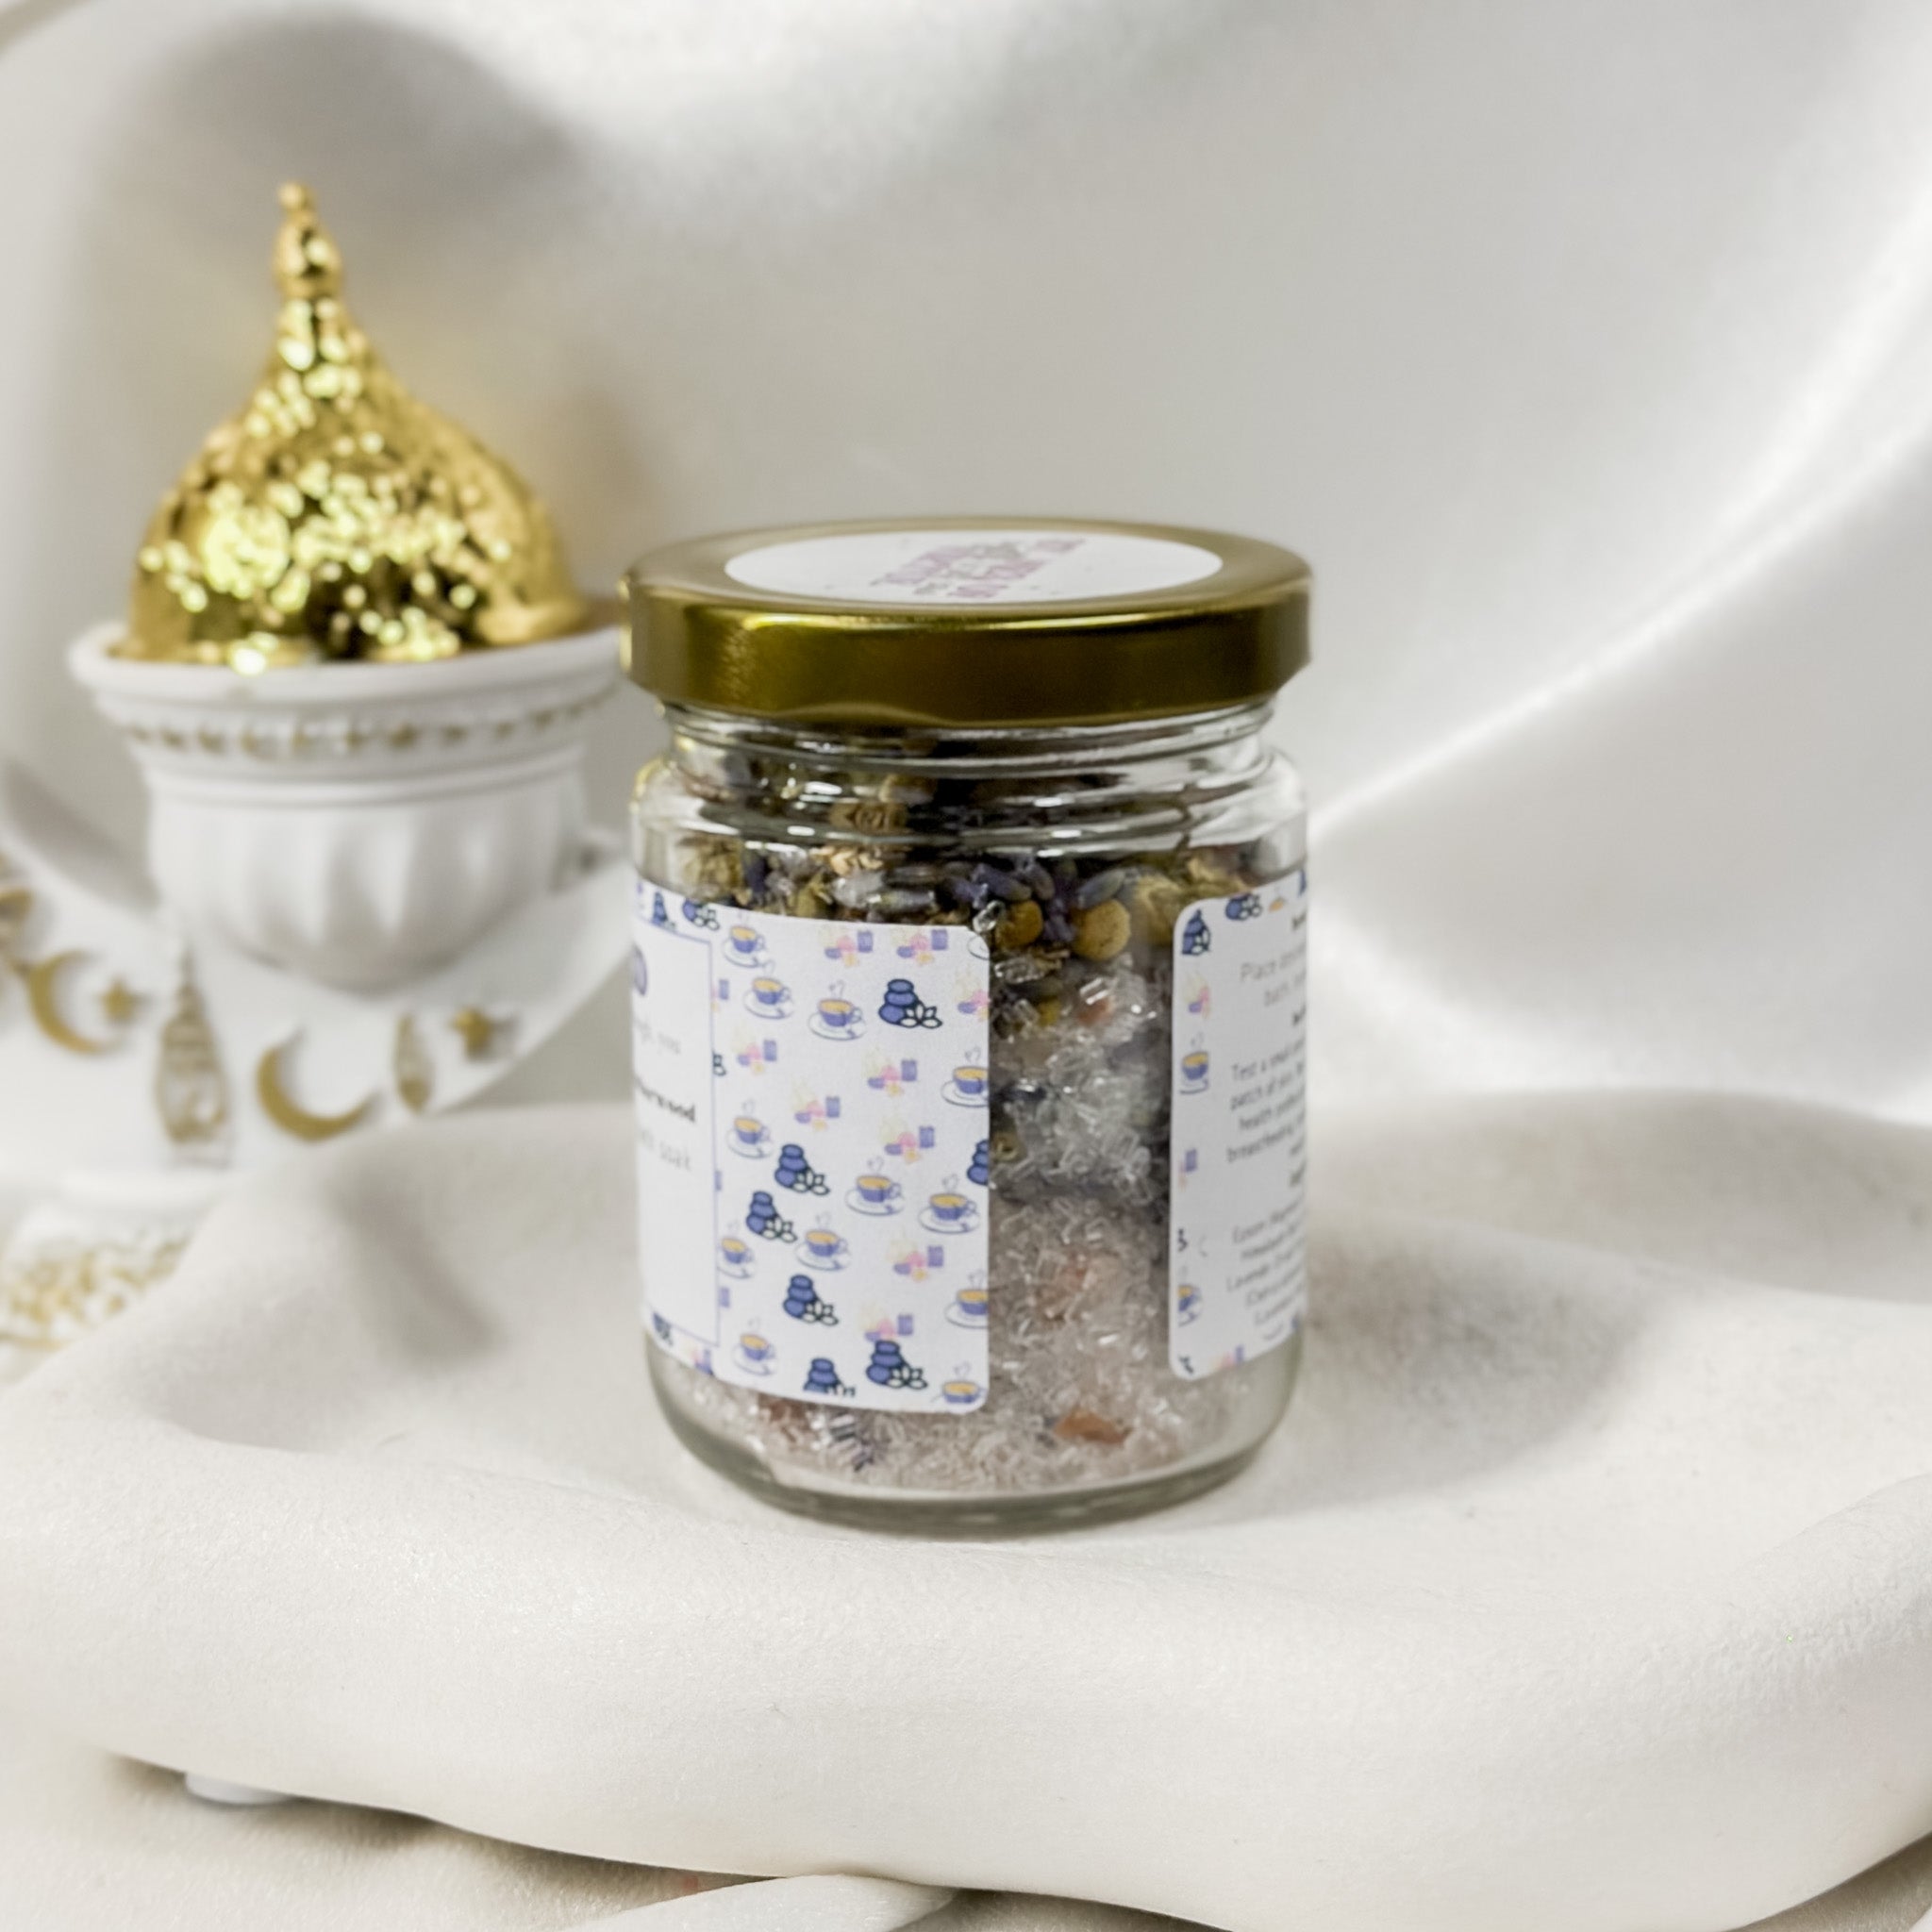 Relaxed - Relaxing/Anxiety Relief Bath Soak